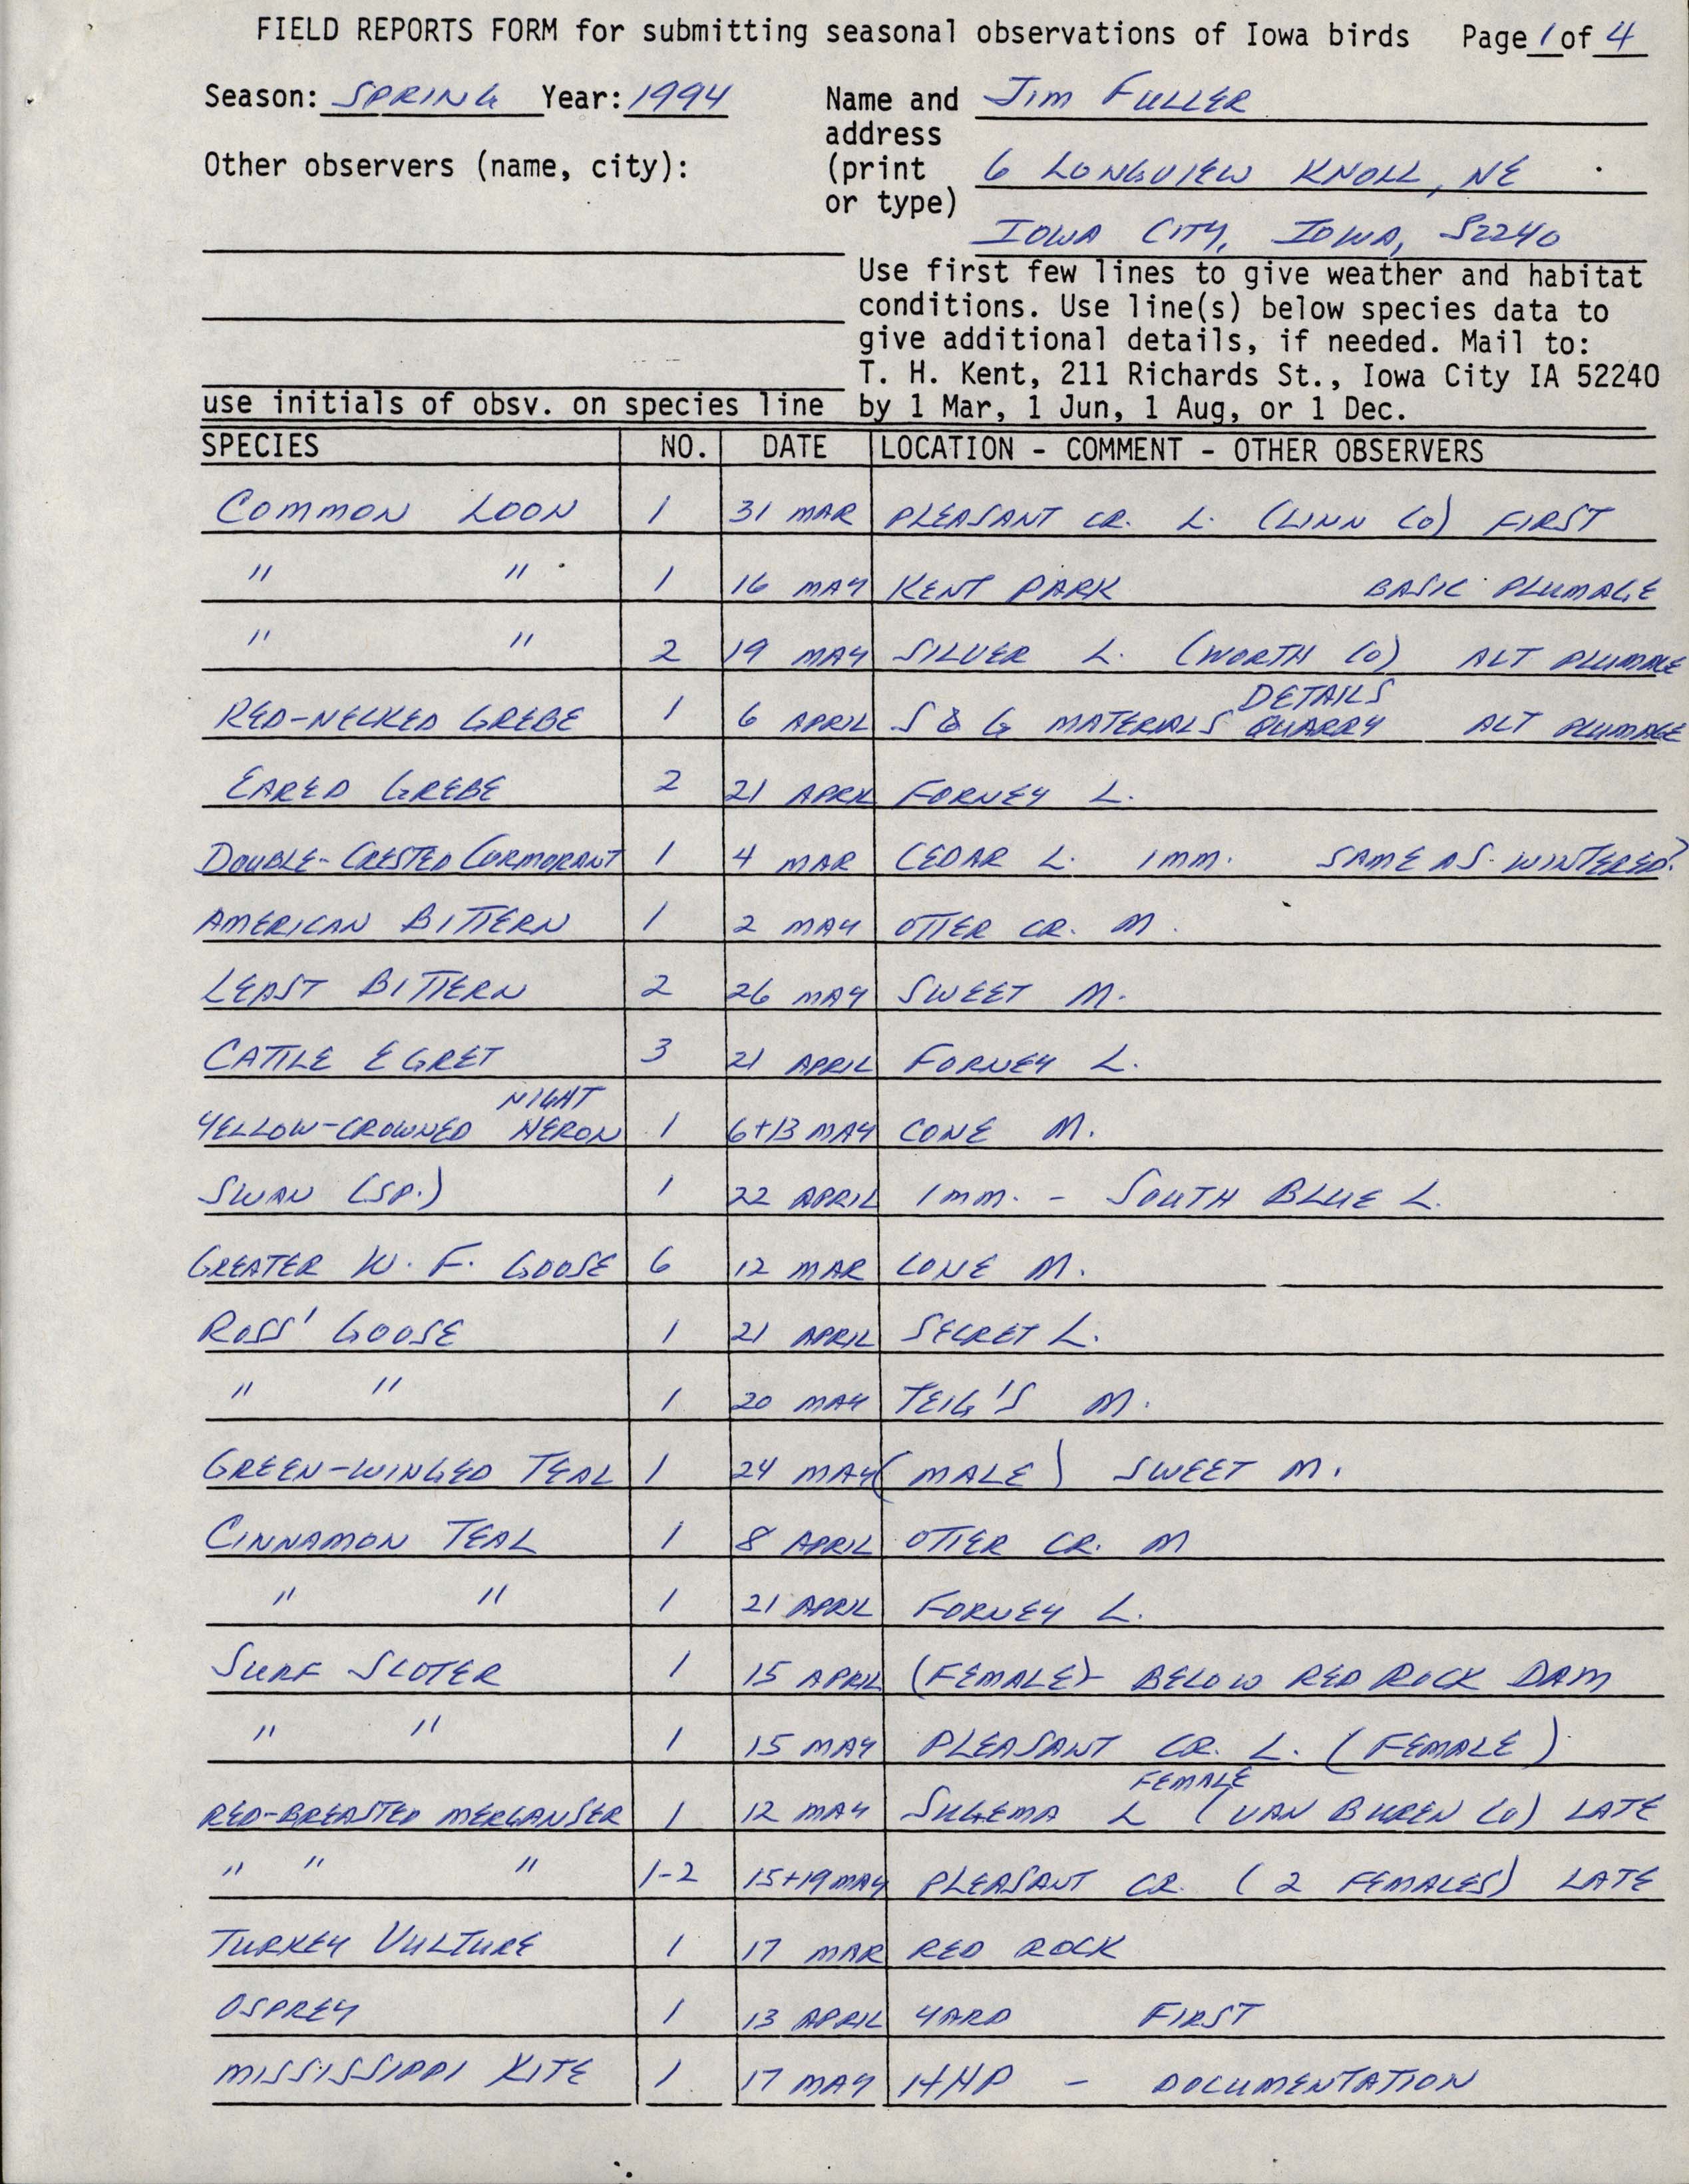 Field reports form for submitting seasonal observations of Iowa birds, Jim Fuller, Spring 1994